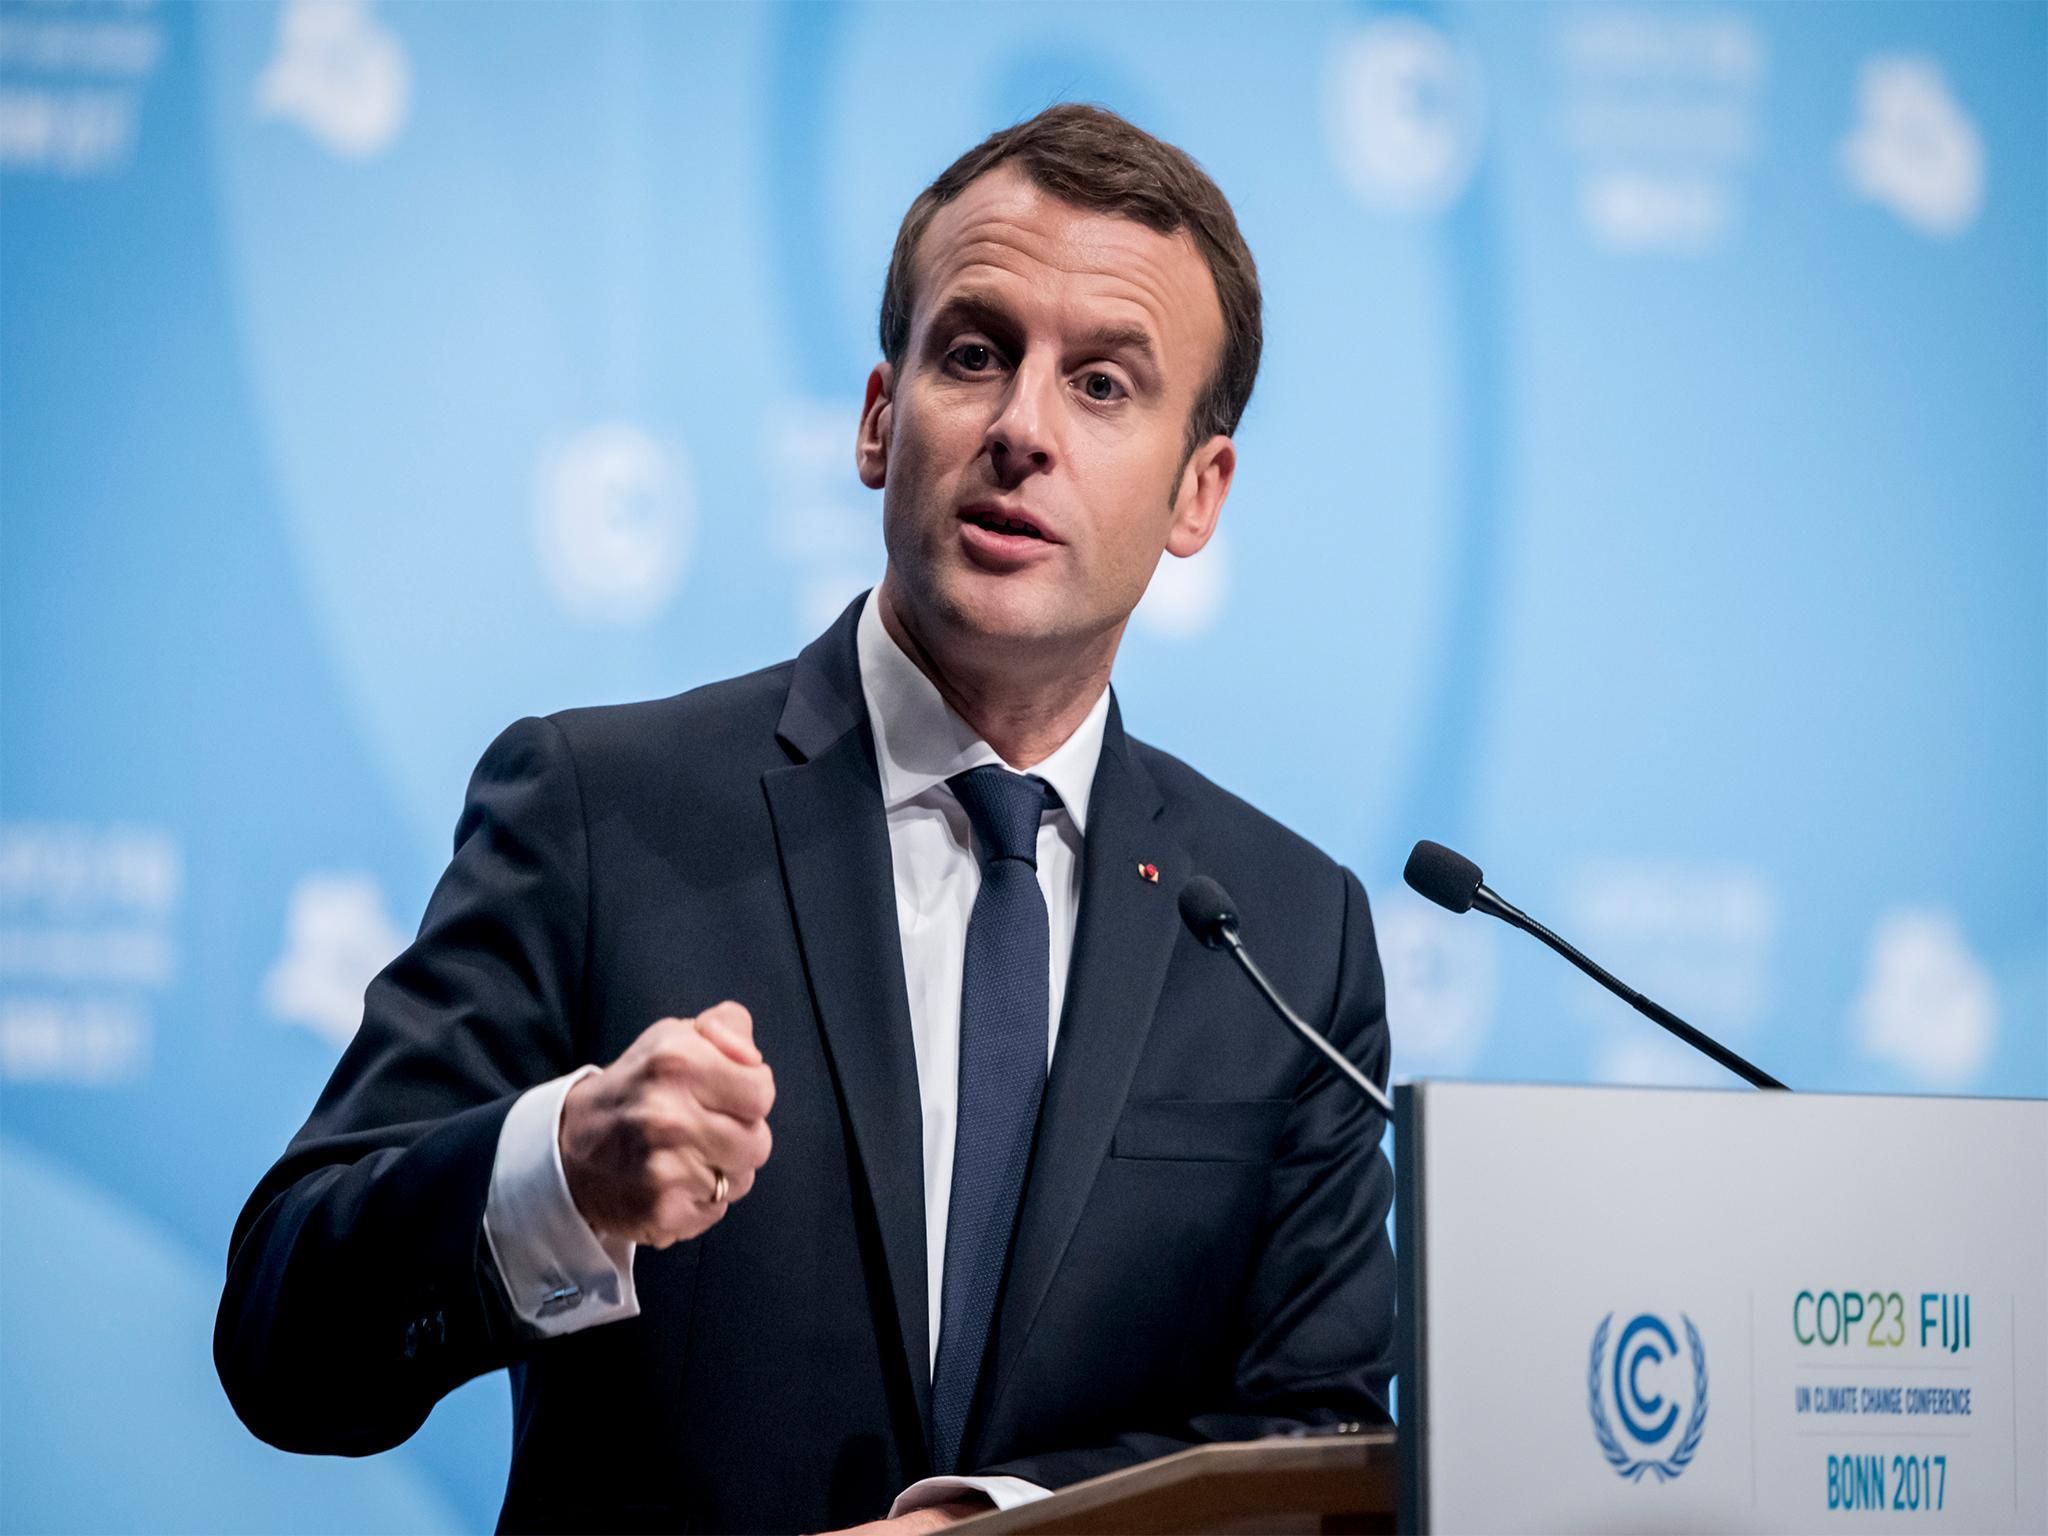 Macron has previously spoken out against Trump's stance towards global warming